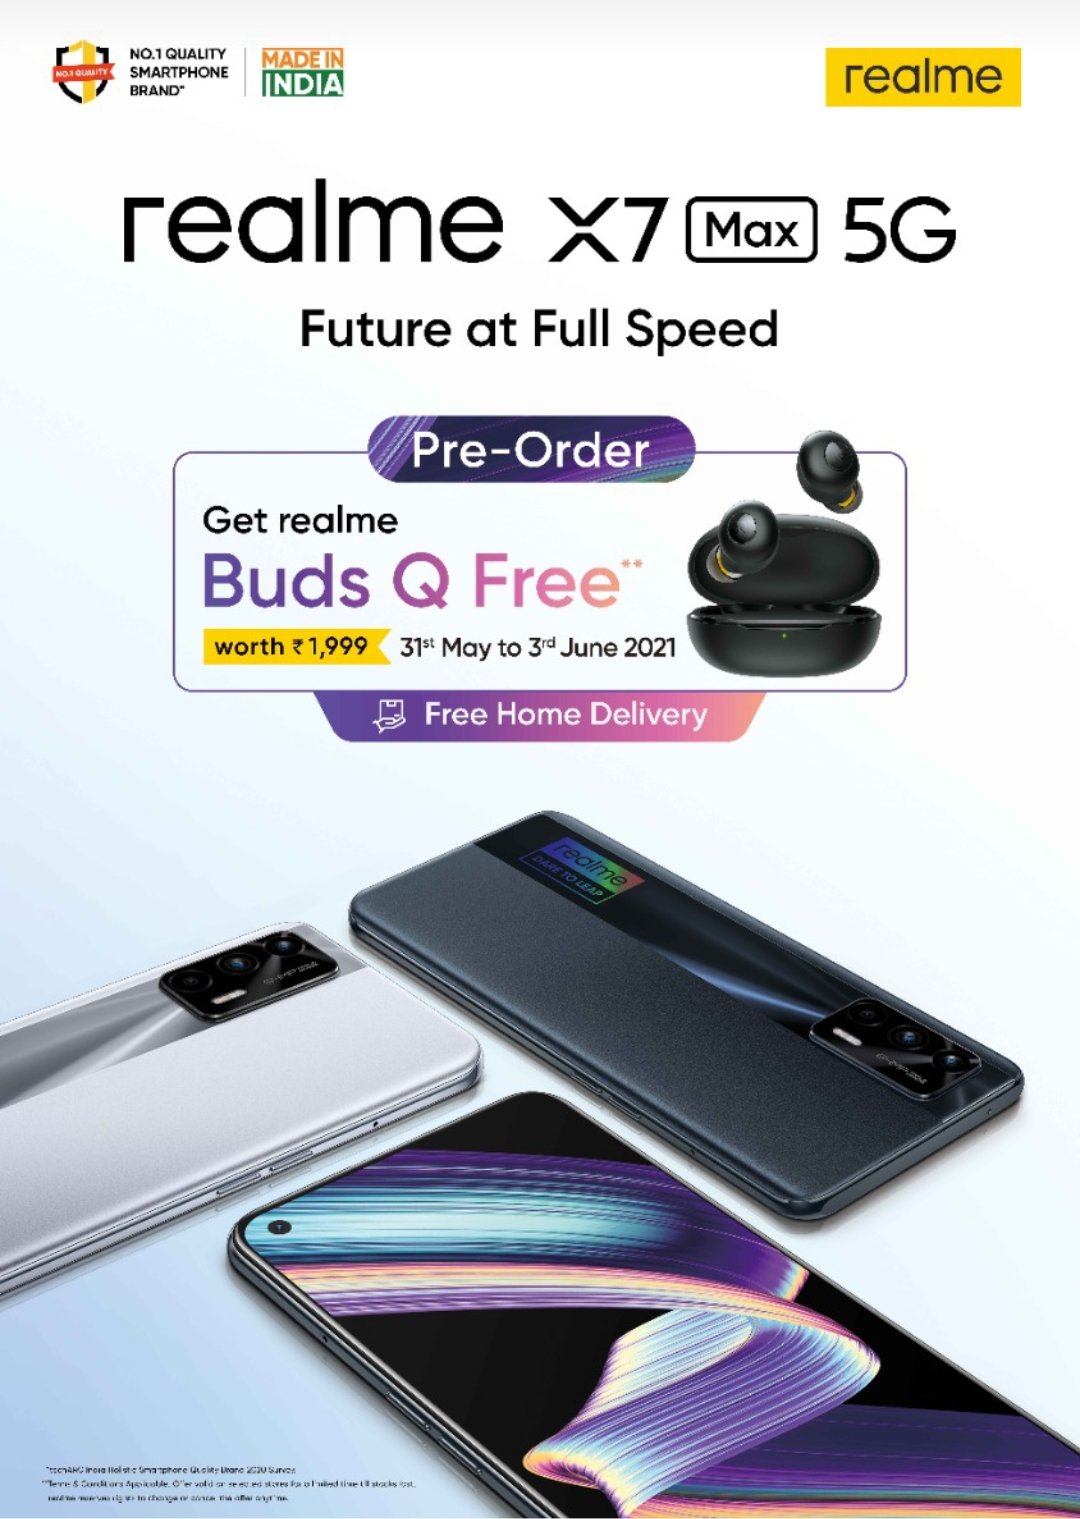 Pre-order Realme X7 Max and get Realme Buds Q free of cost